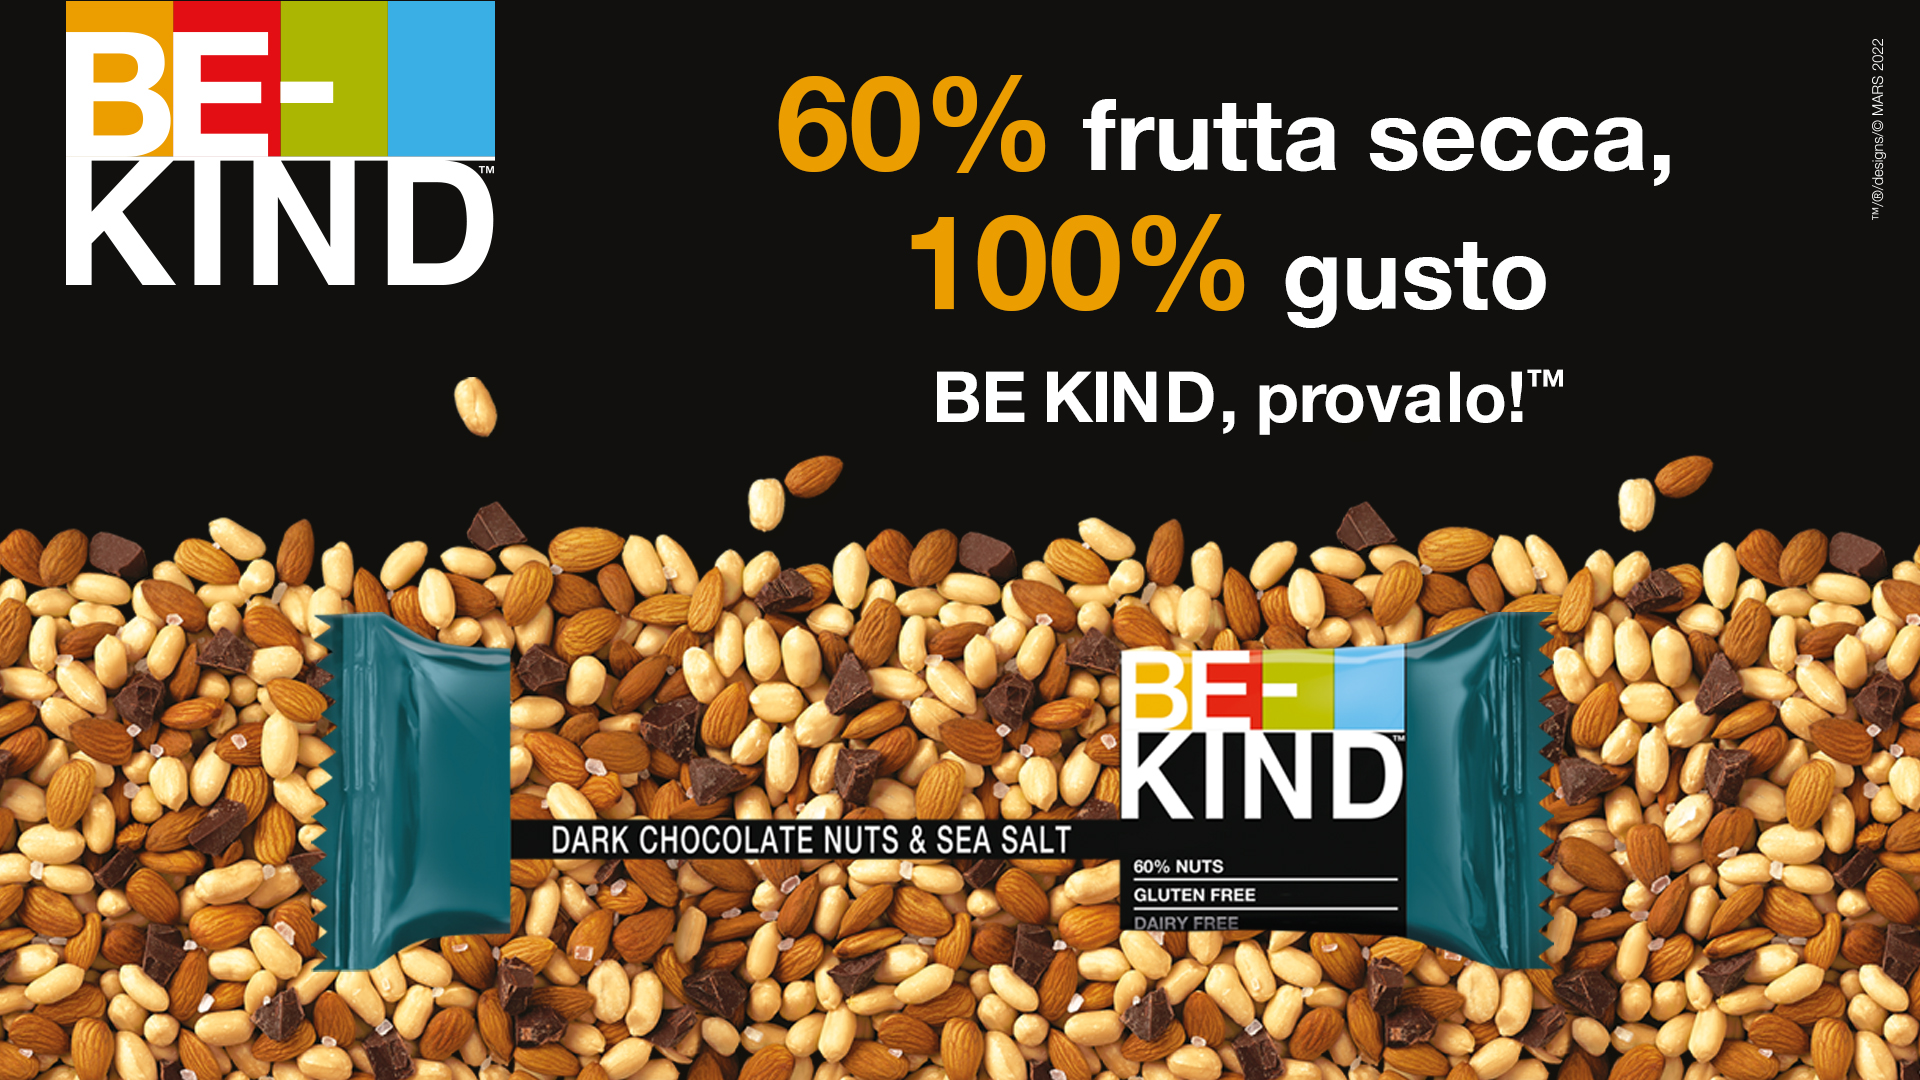 Be-Kind